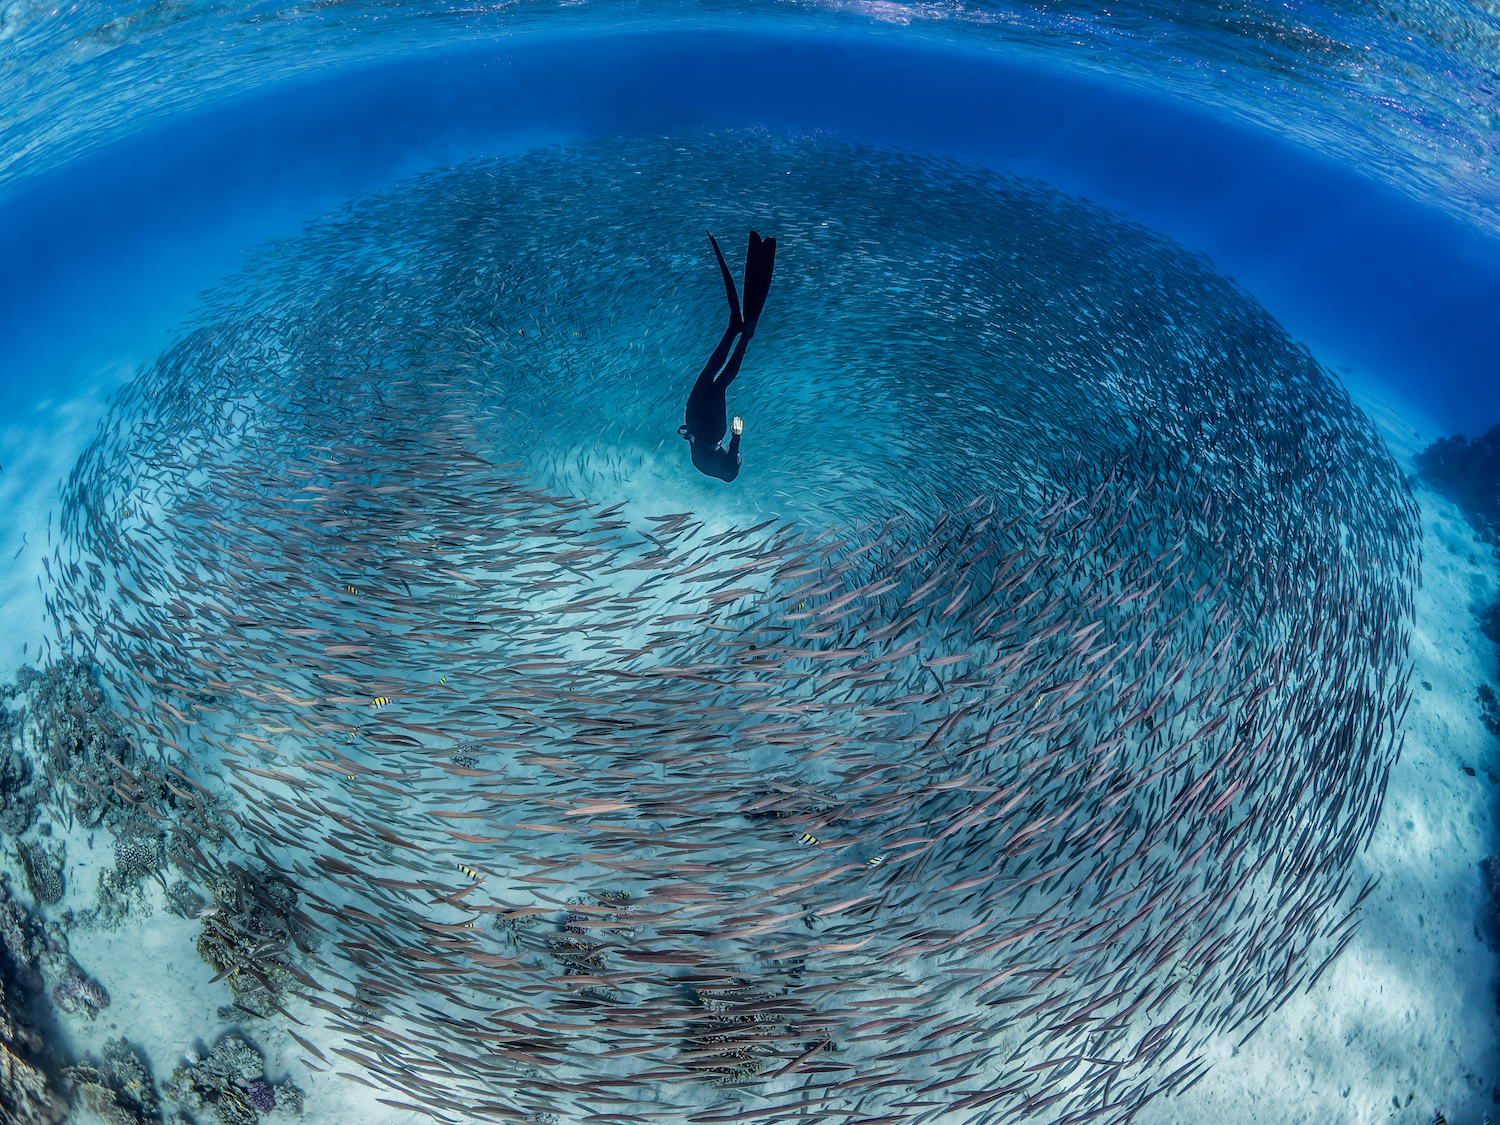 A diver is encircled by thousands of baby barracudas